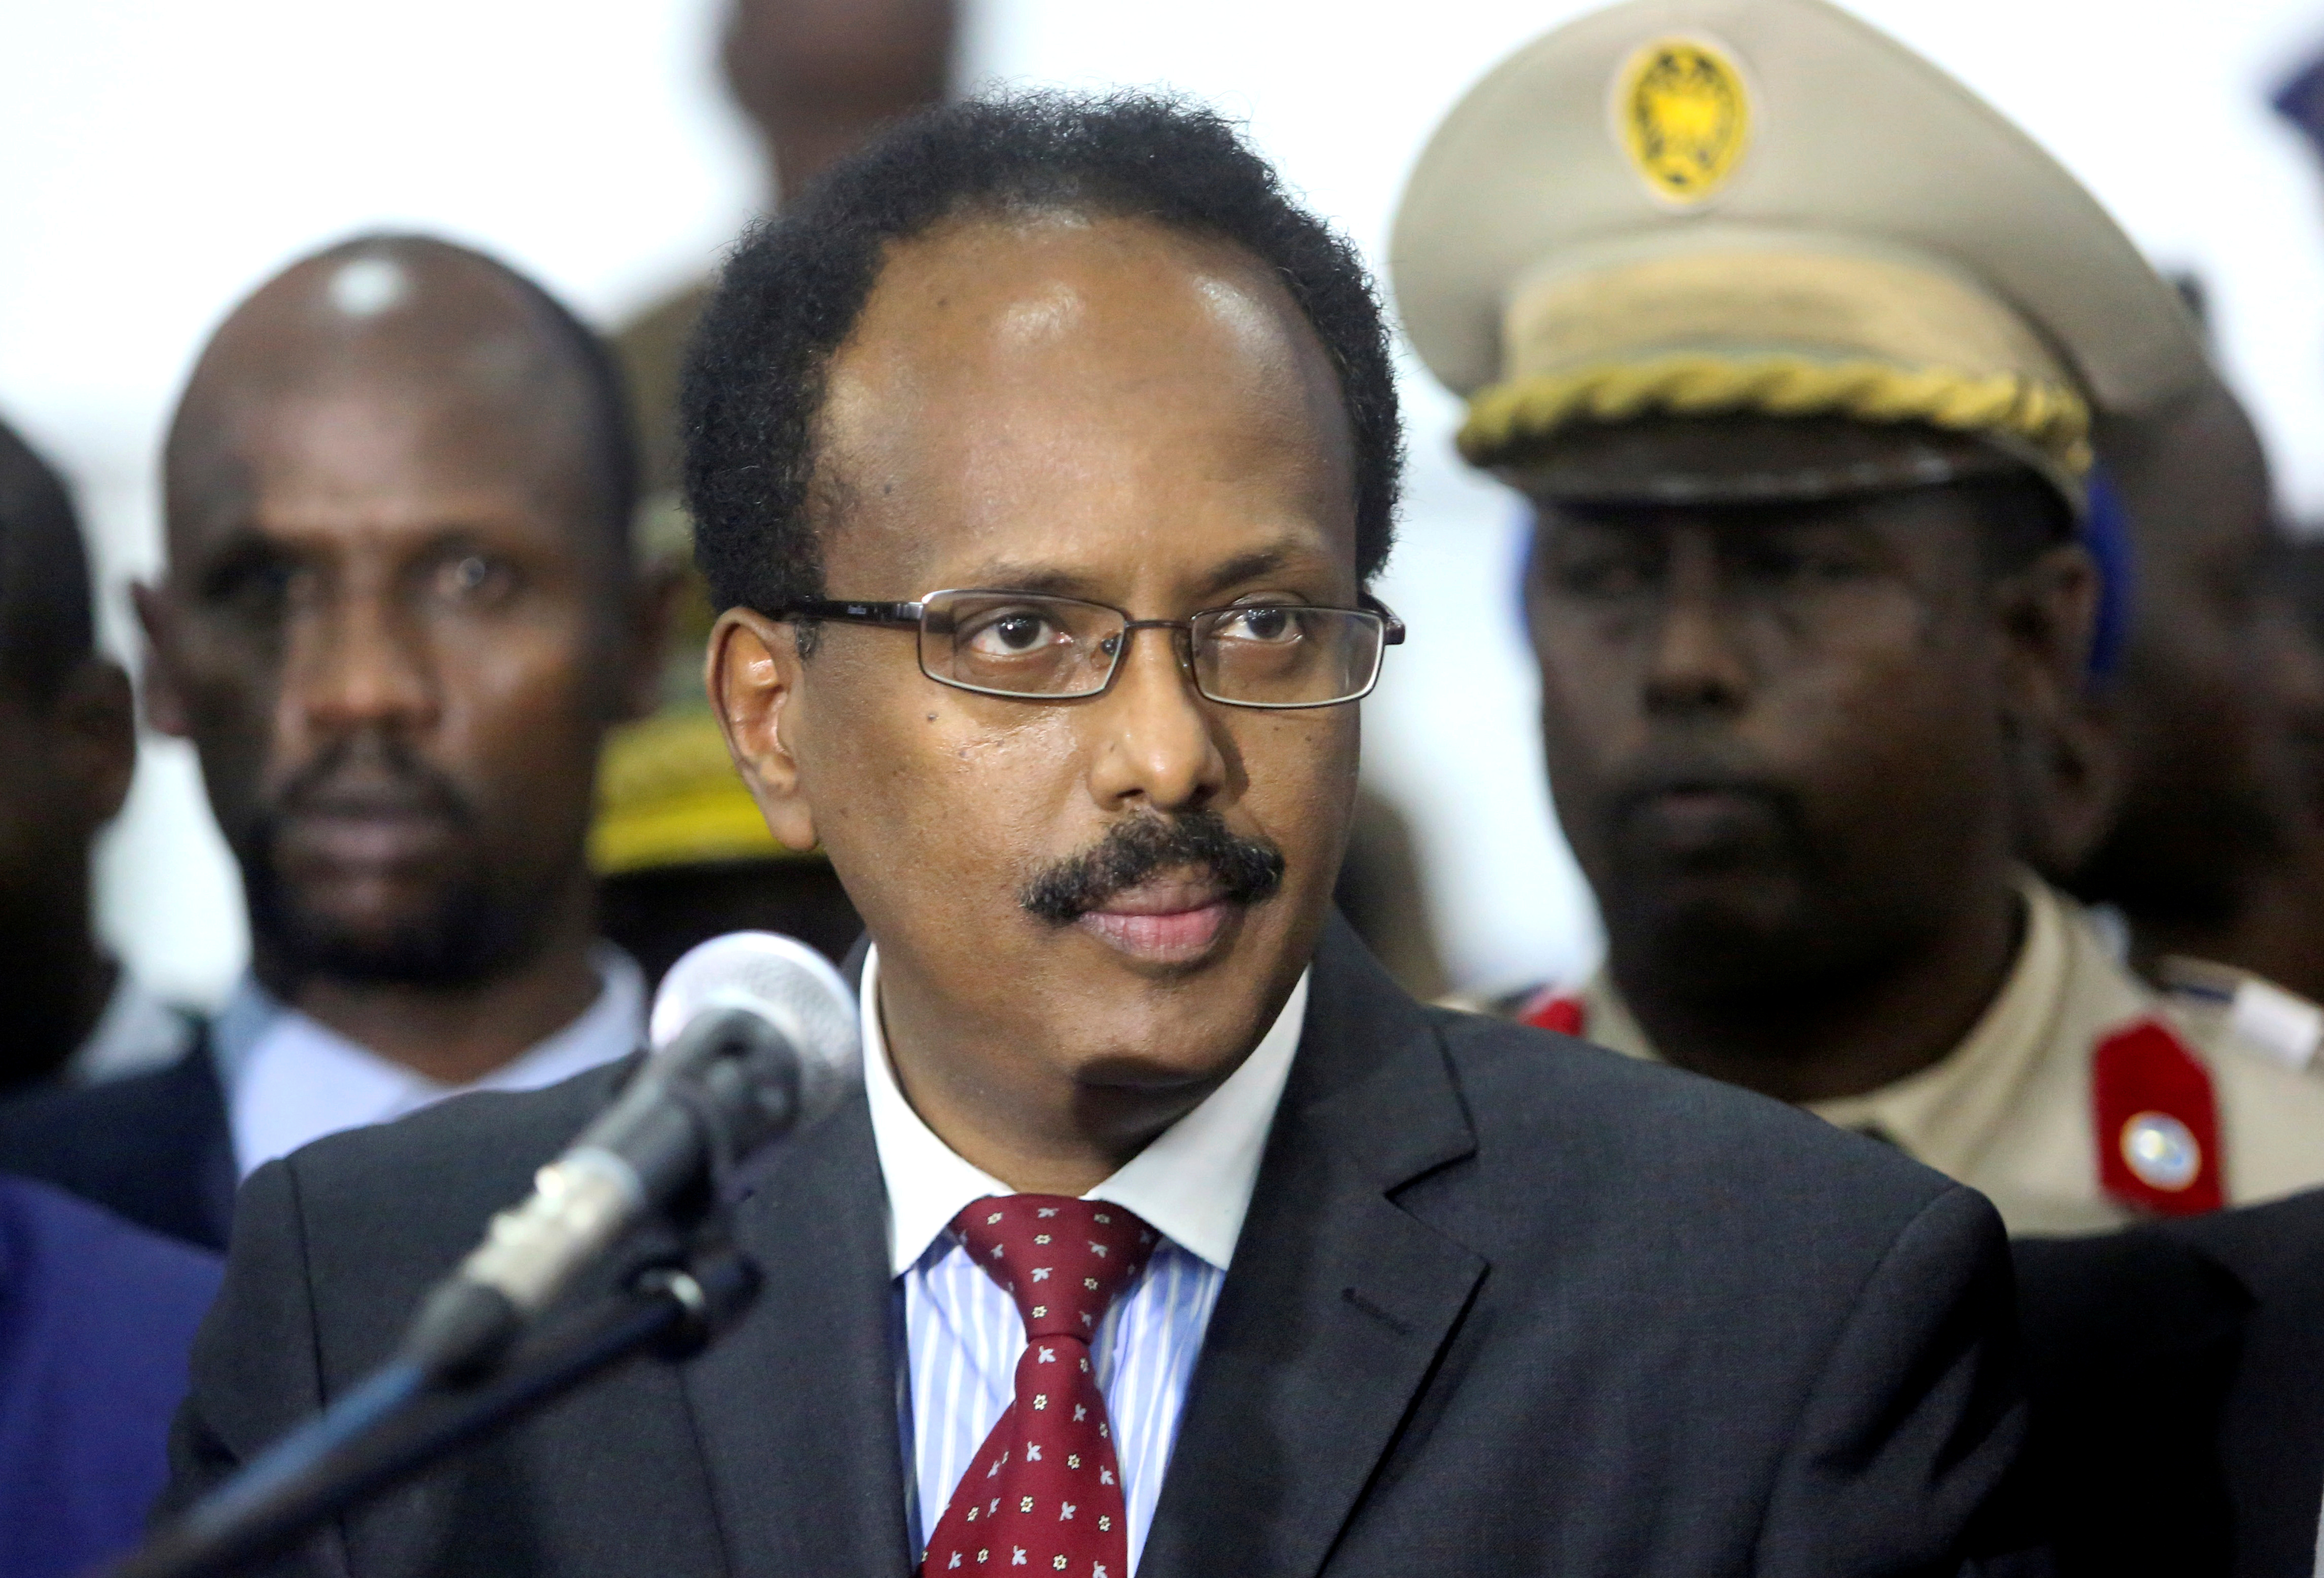 Somalia's newly elected President Mohamed Abdullahi Farmajo addresses lawmakers after winning the vote at the airport in Somalia's capital Mogadishu